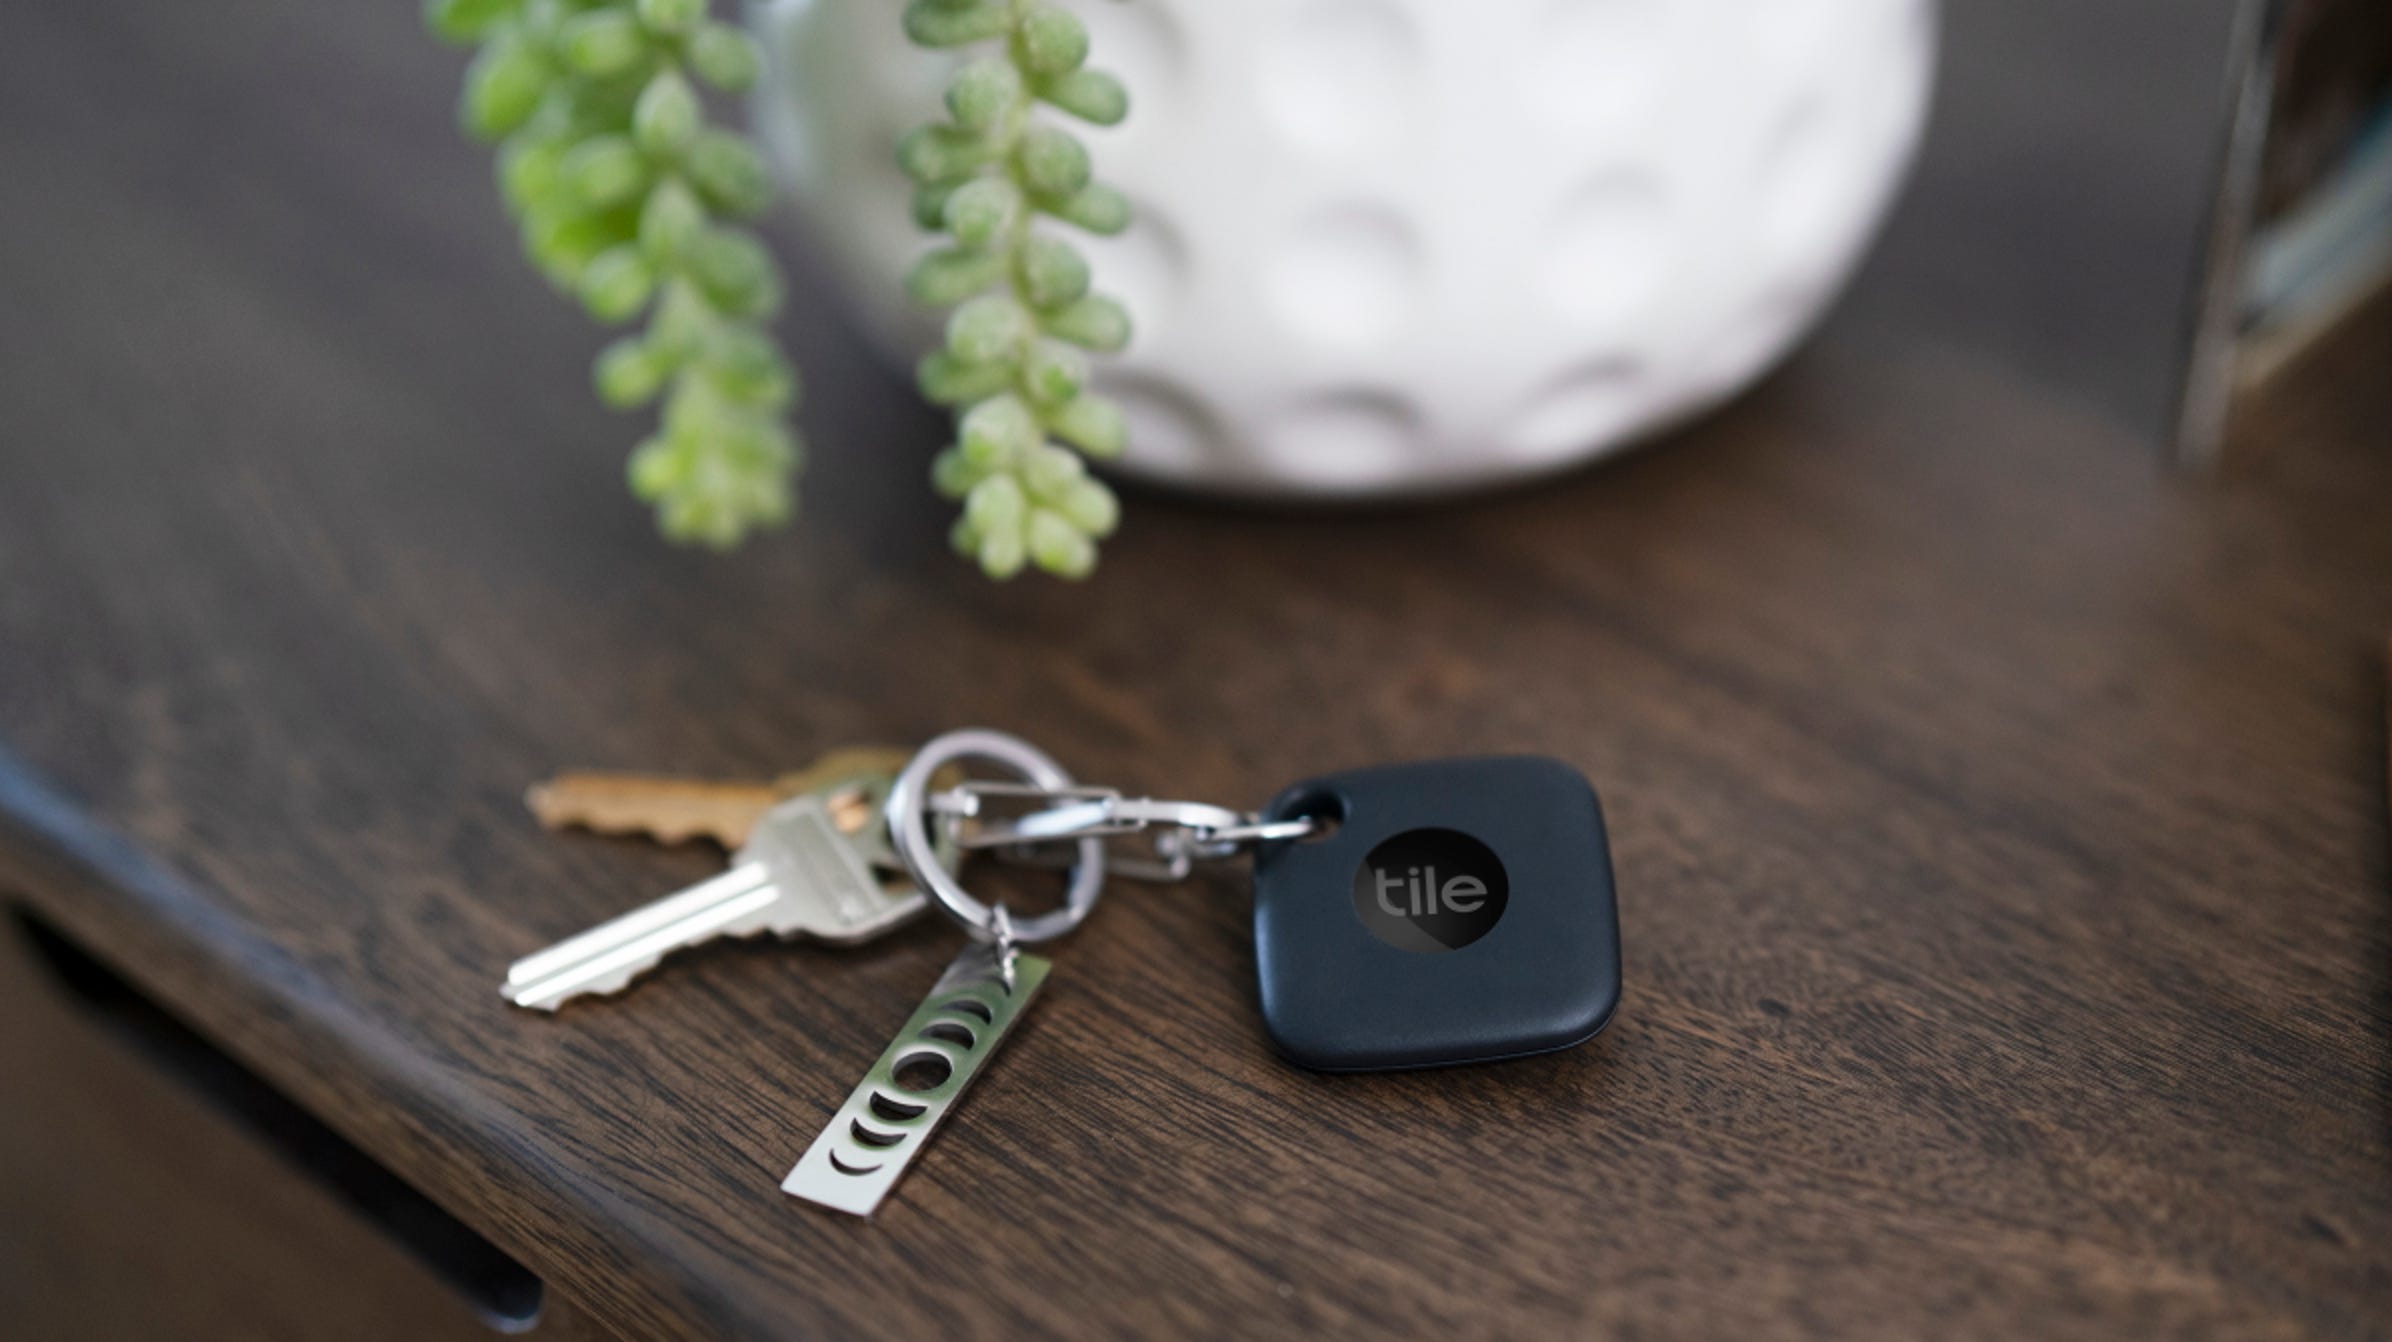 The Best Bluetooth Trackers of 2022